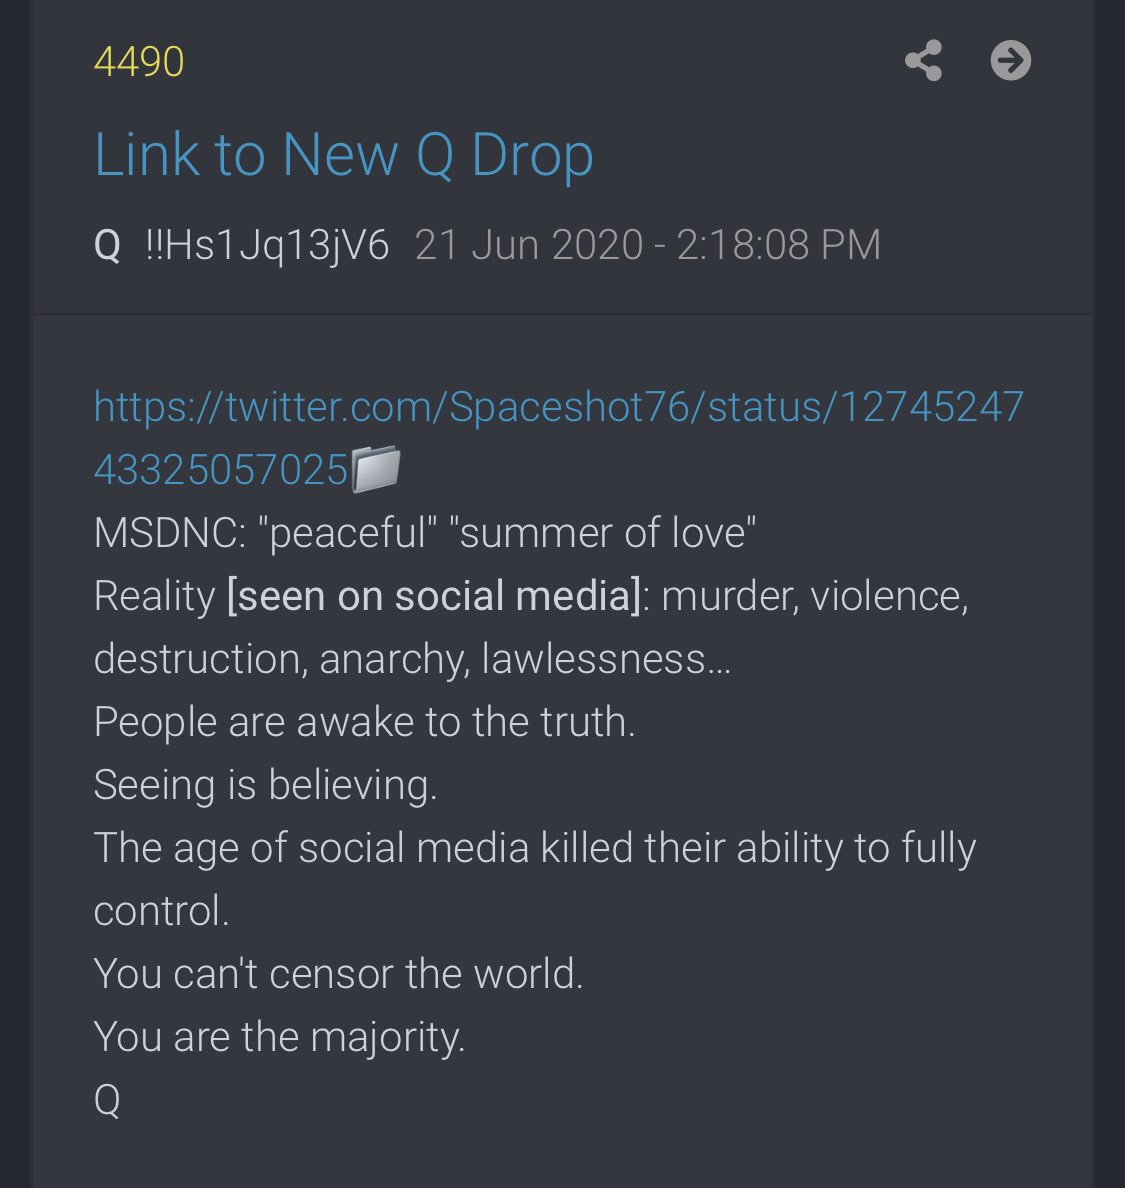  https://twitter.com/Spaceshot76/status/1274524743325057025Reality [seen on social media]: murder, violence, destruction, anarchy, lawlessness…People are awake to the truth.Seeing is believing. The age of social media killed their ability to fully control.You can't censor the world. You are the majority.Q